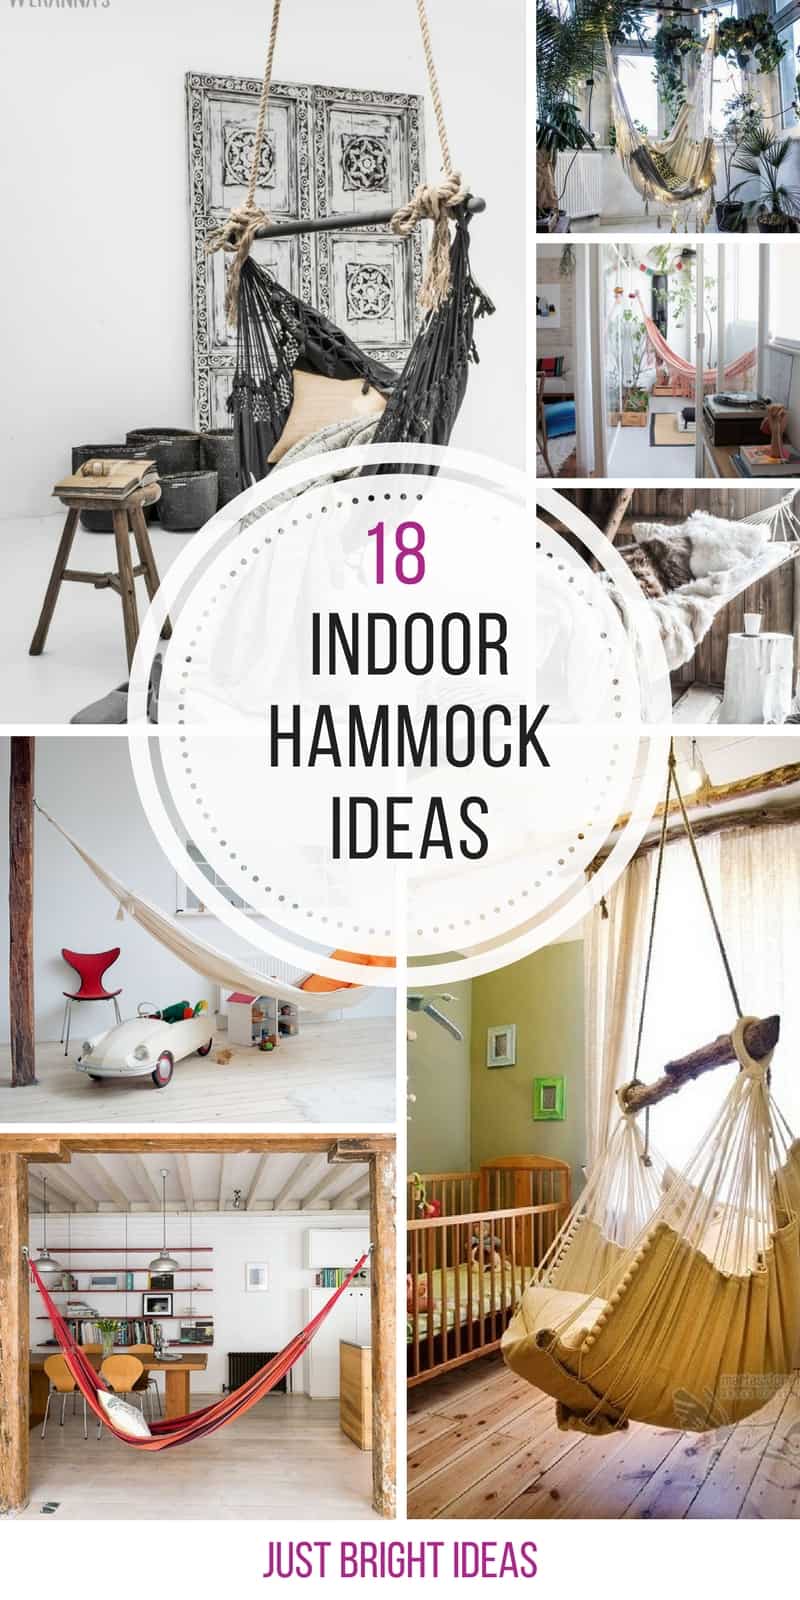 We need an indoor hammock right now! Thanks for sharing!